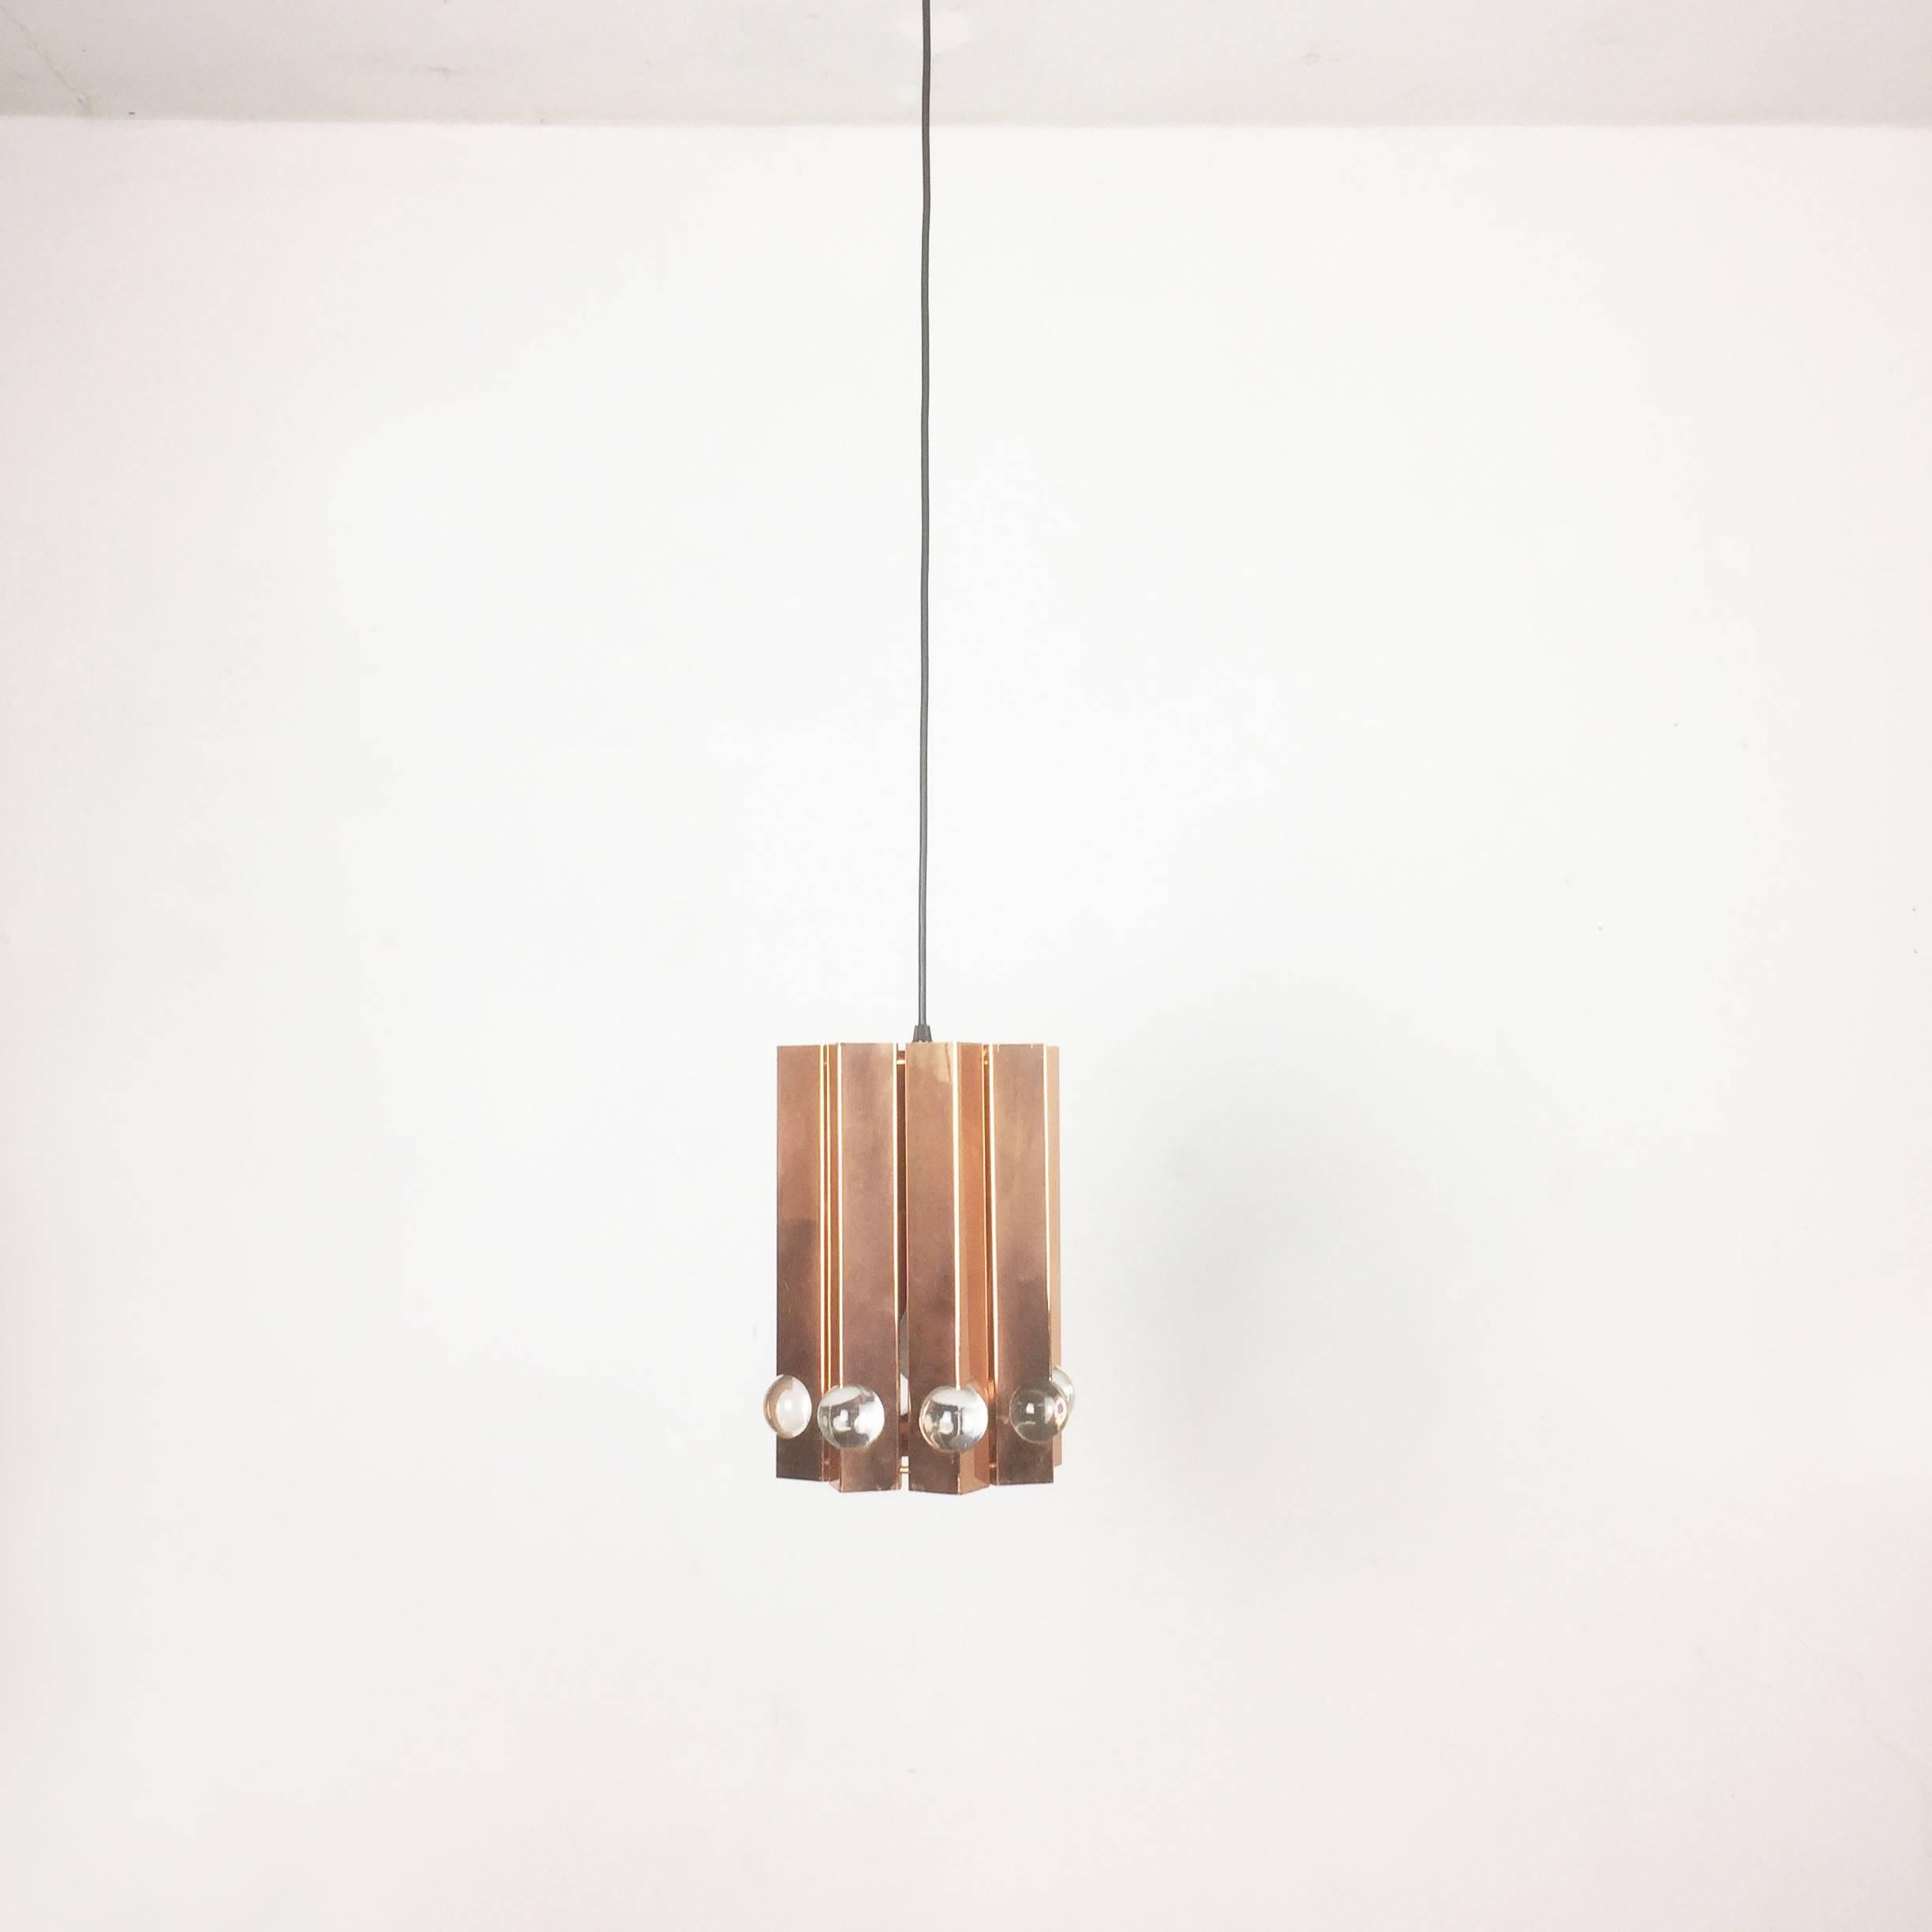 Article:

hanging light



Origin:

Denmark



Age:

1960s


Description:

This hanging lamp was designed and produced in the 1960s in Denmark. The piece is made from solid metals with copper tone finish, and has cubic perforation